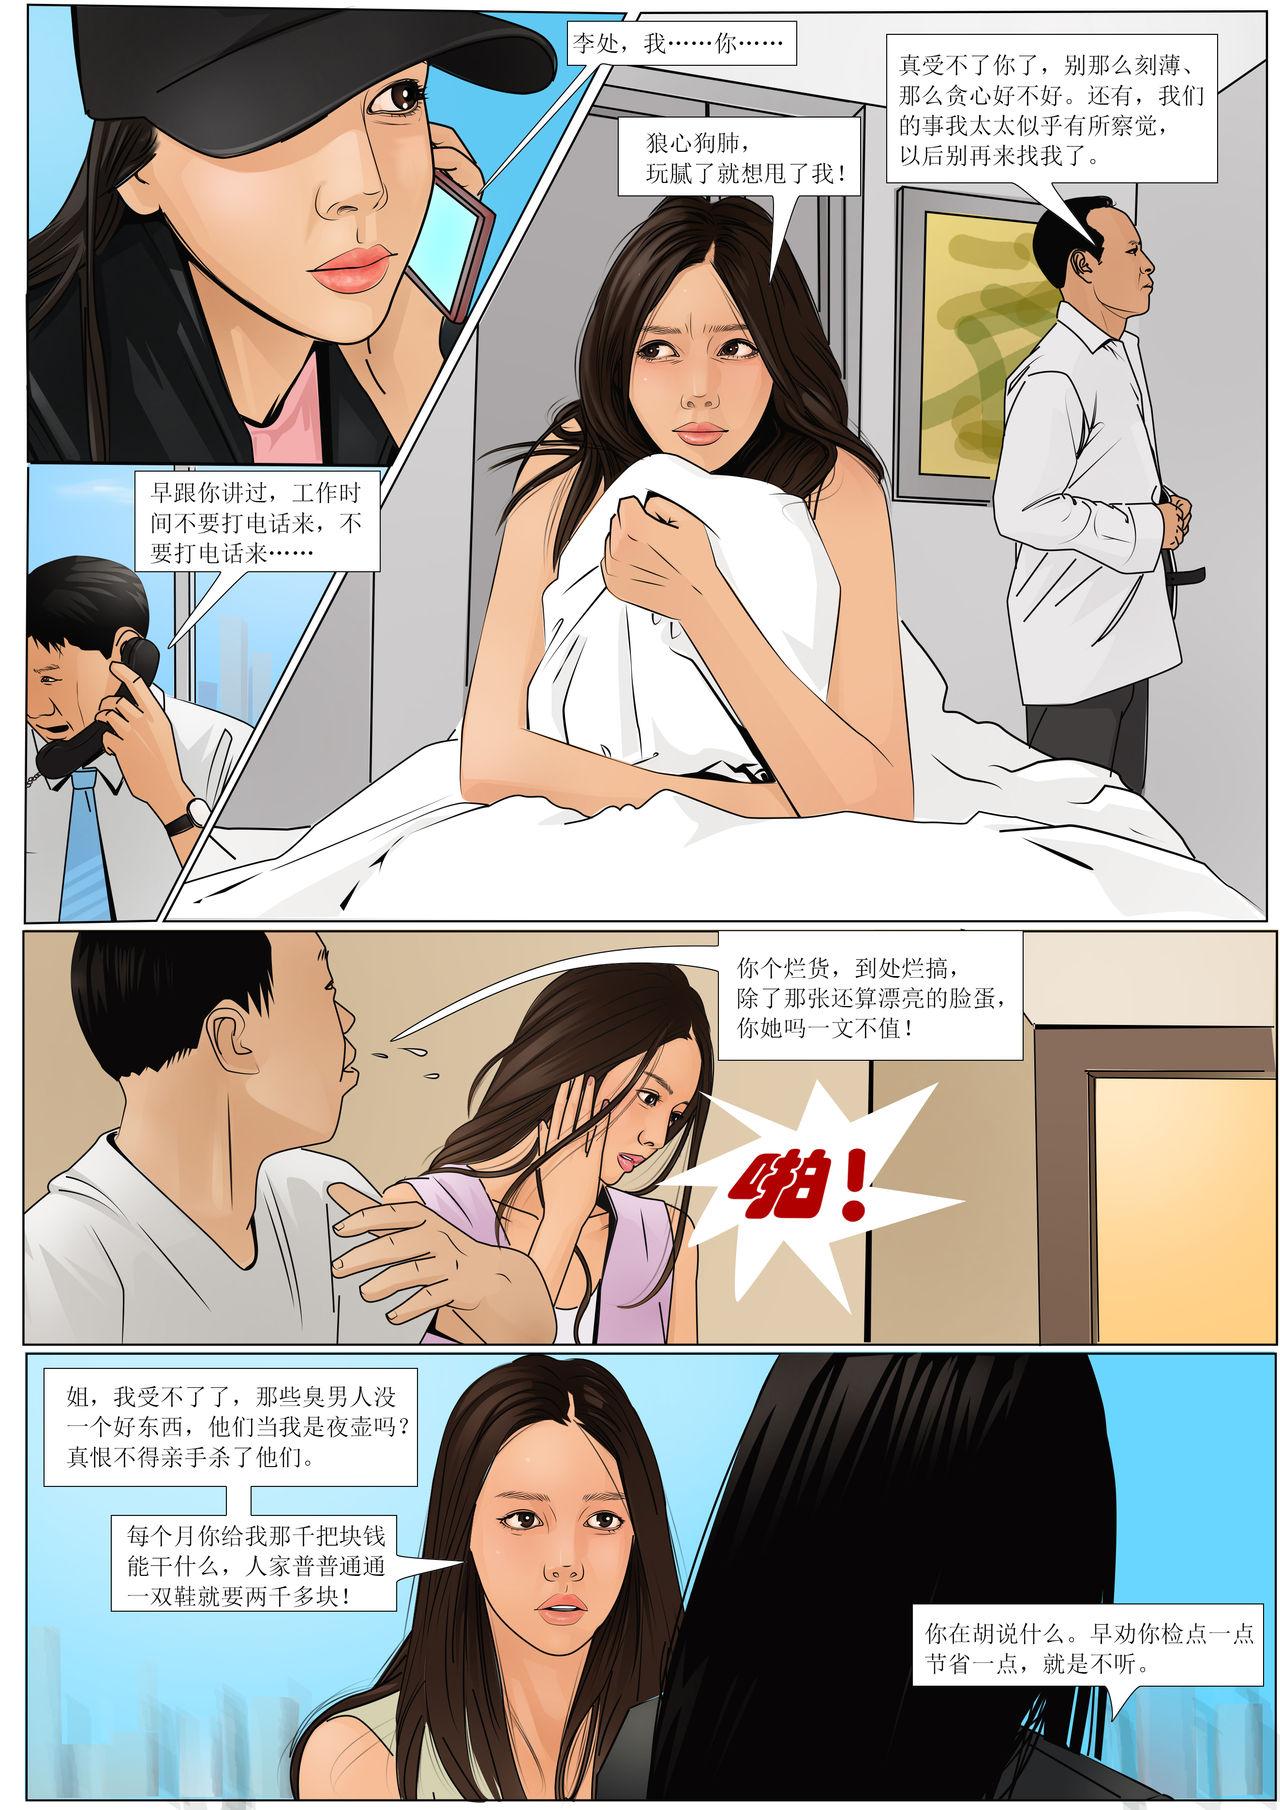 Ginger 枫语漫画 Foryou 《极度重犯》第八话 Three Female Prisoners 8 Chinese Hair - Page 5